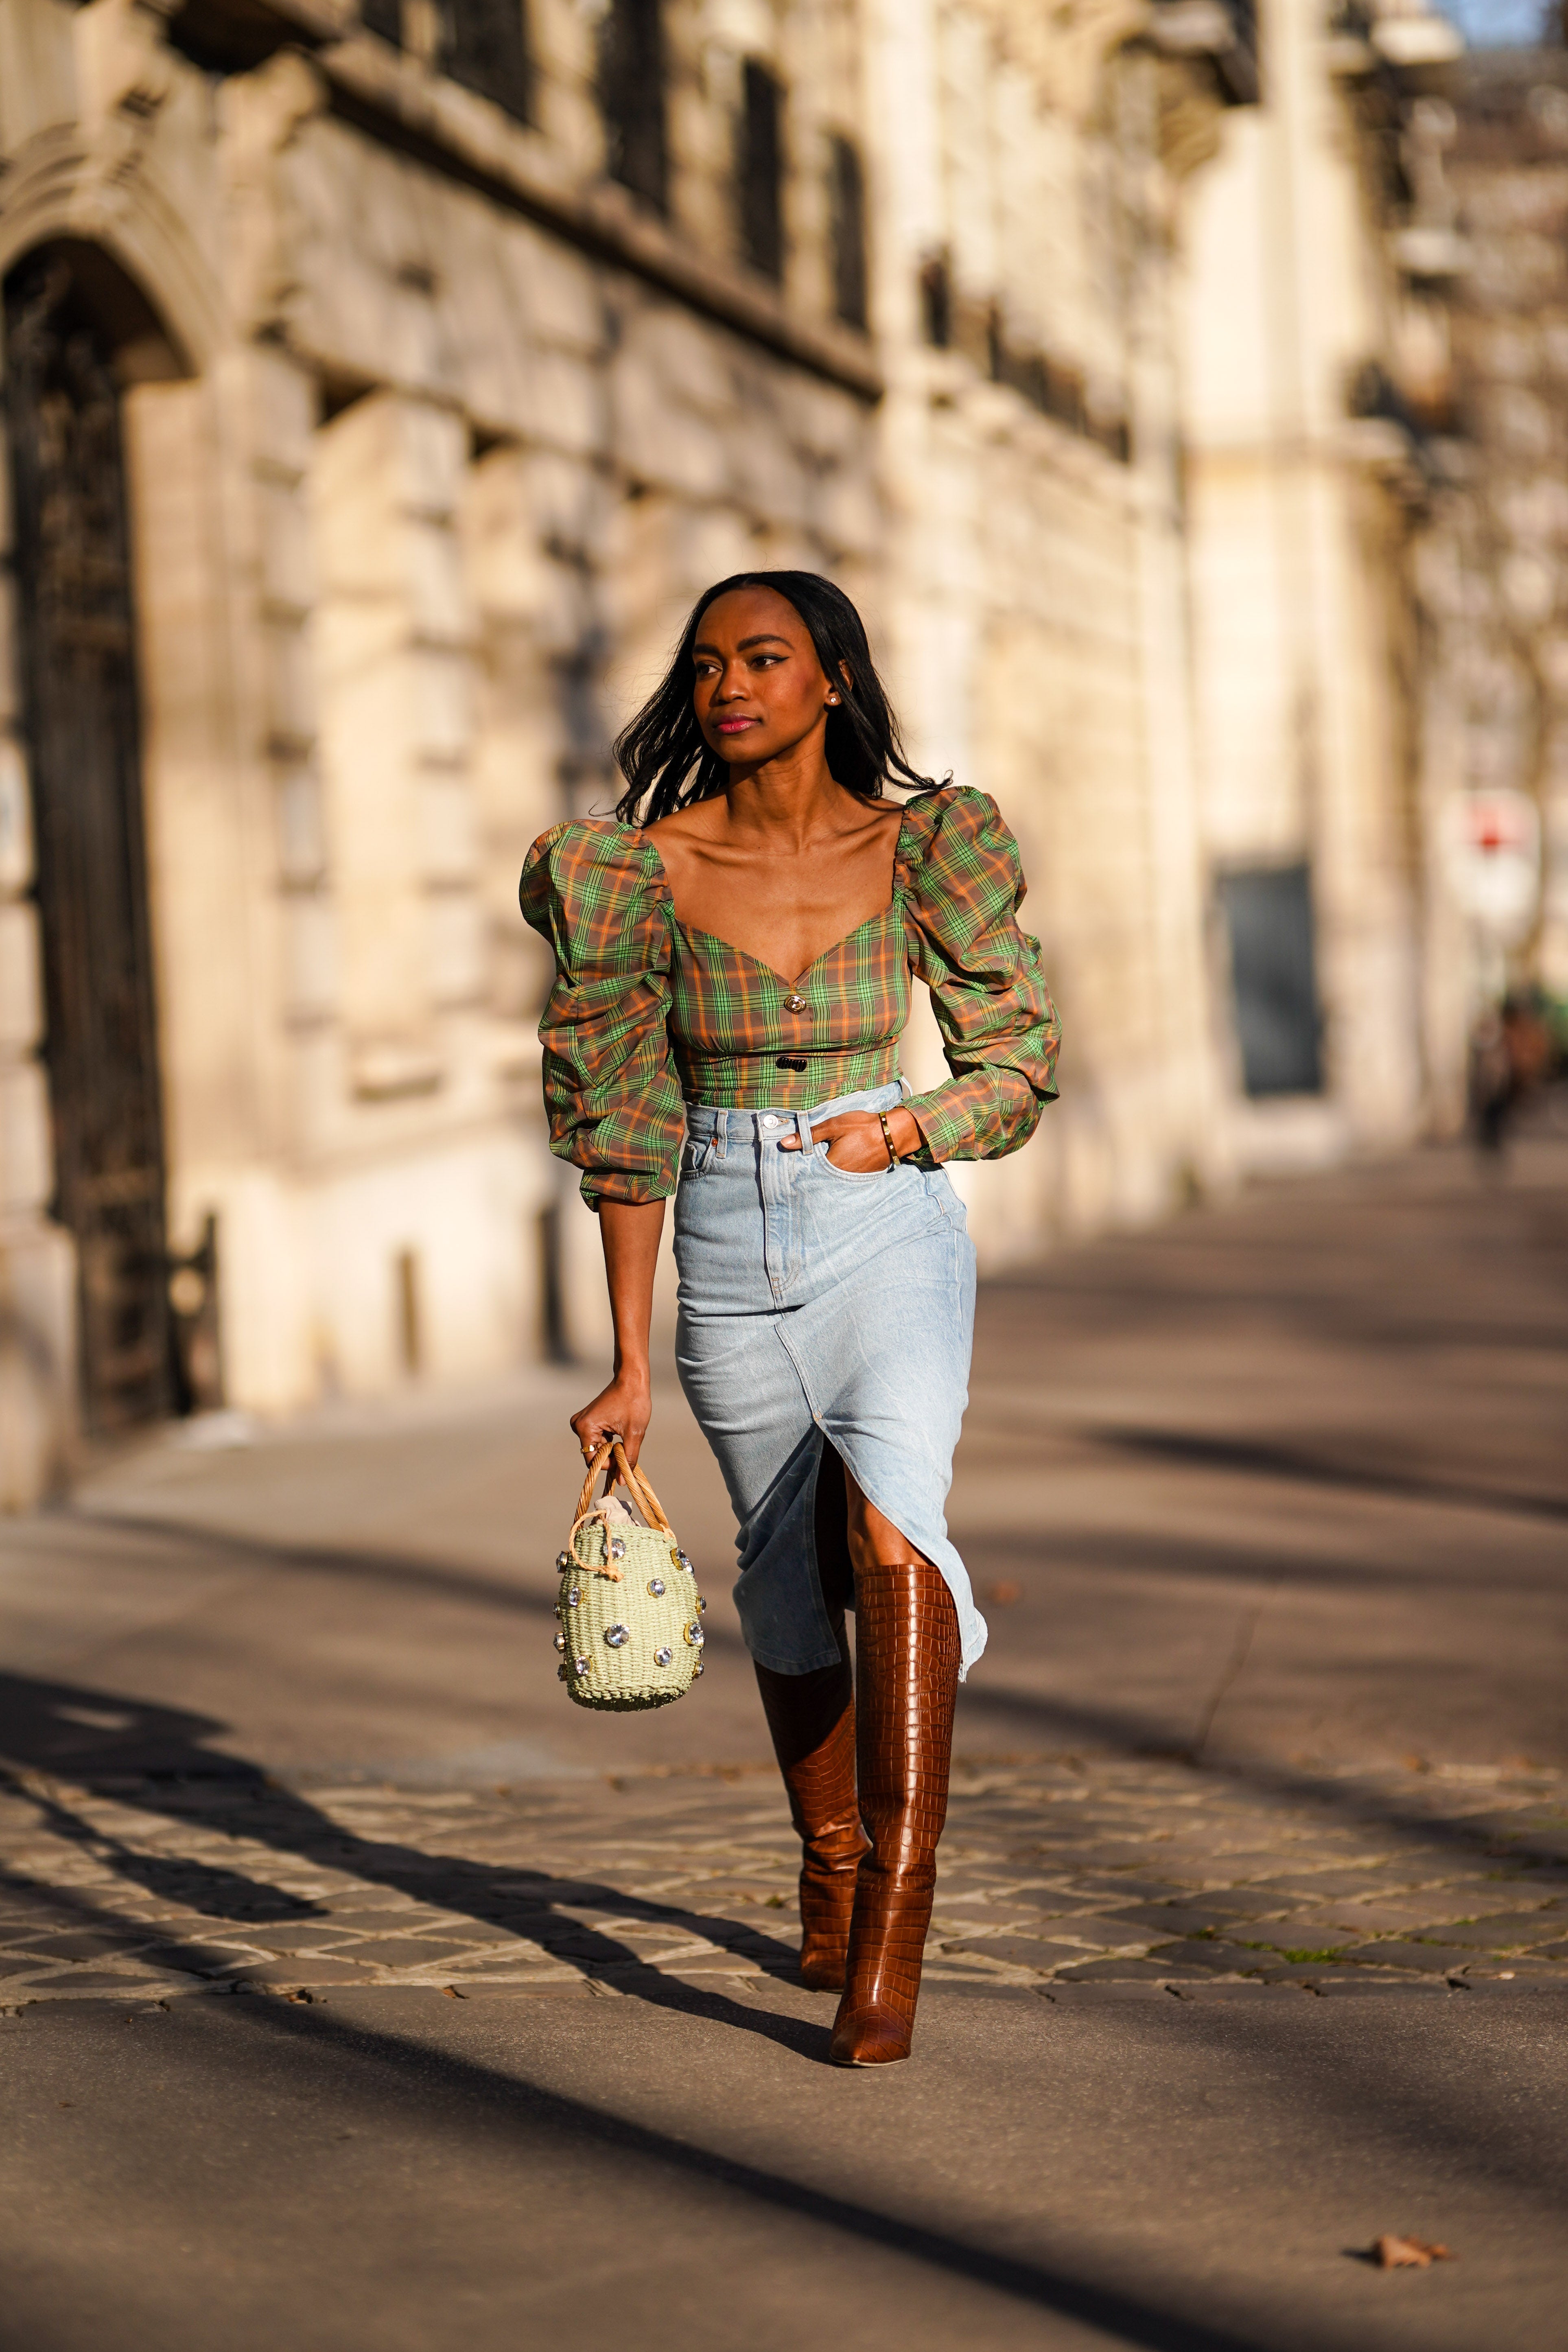 How To Wear The Denim Skirt In 2017 Like A Grown-Up? - The Fashion Tag Blog